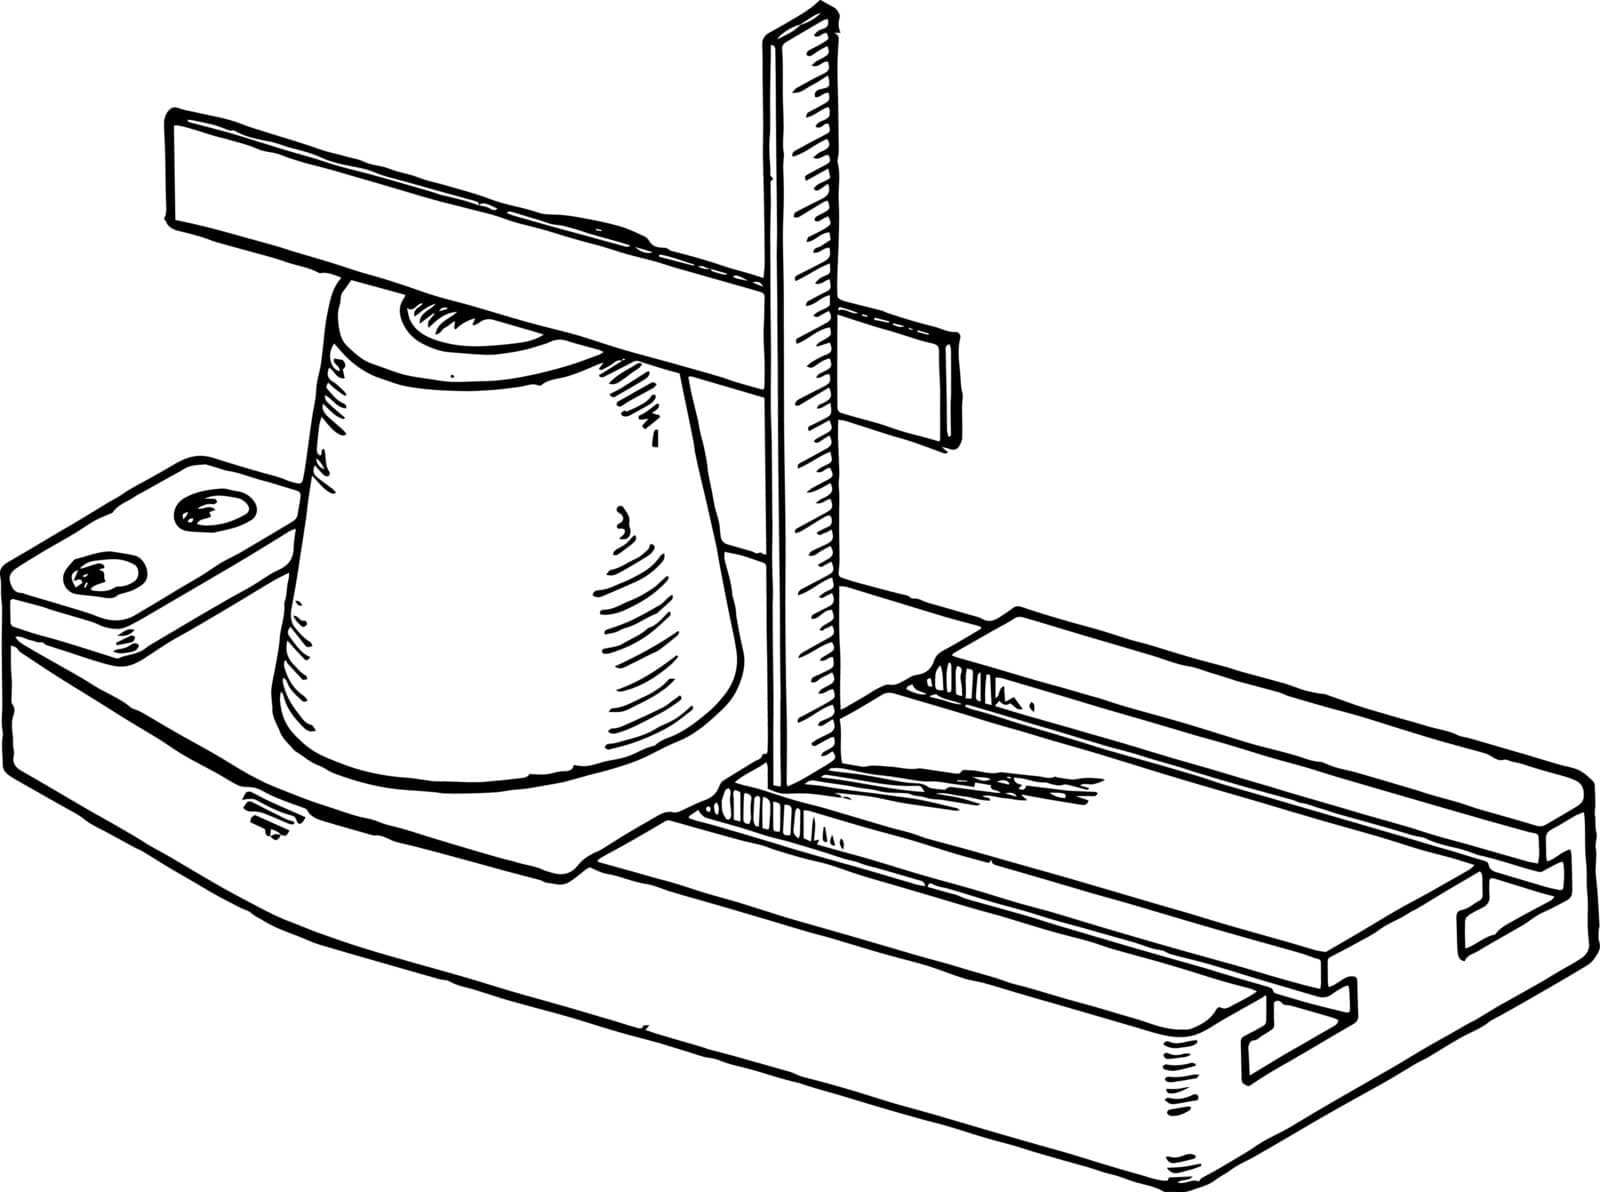 Measuring Castings using Straight Edge is the dimensions of the casting and measure the critical dimensions which is possible and particularly drift, vintage line drawing or engraving illustration.